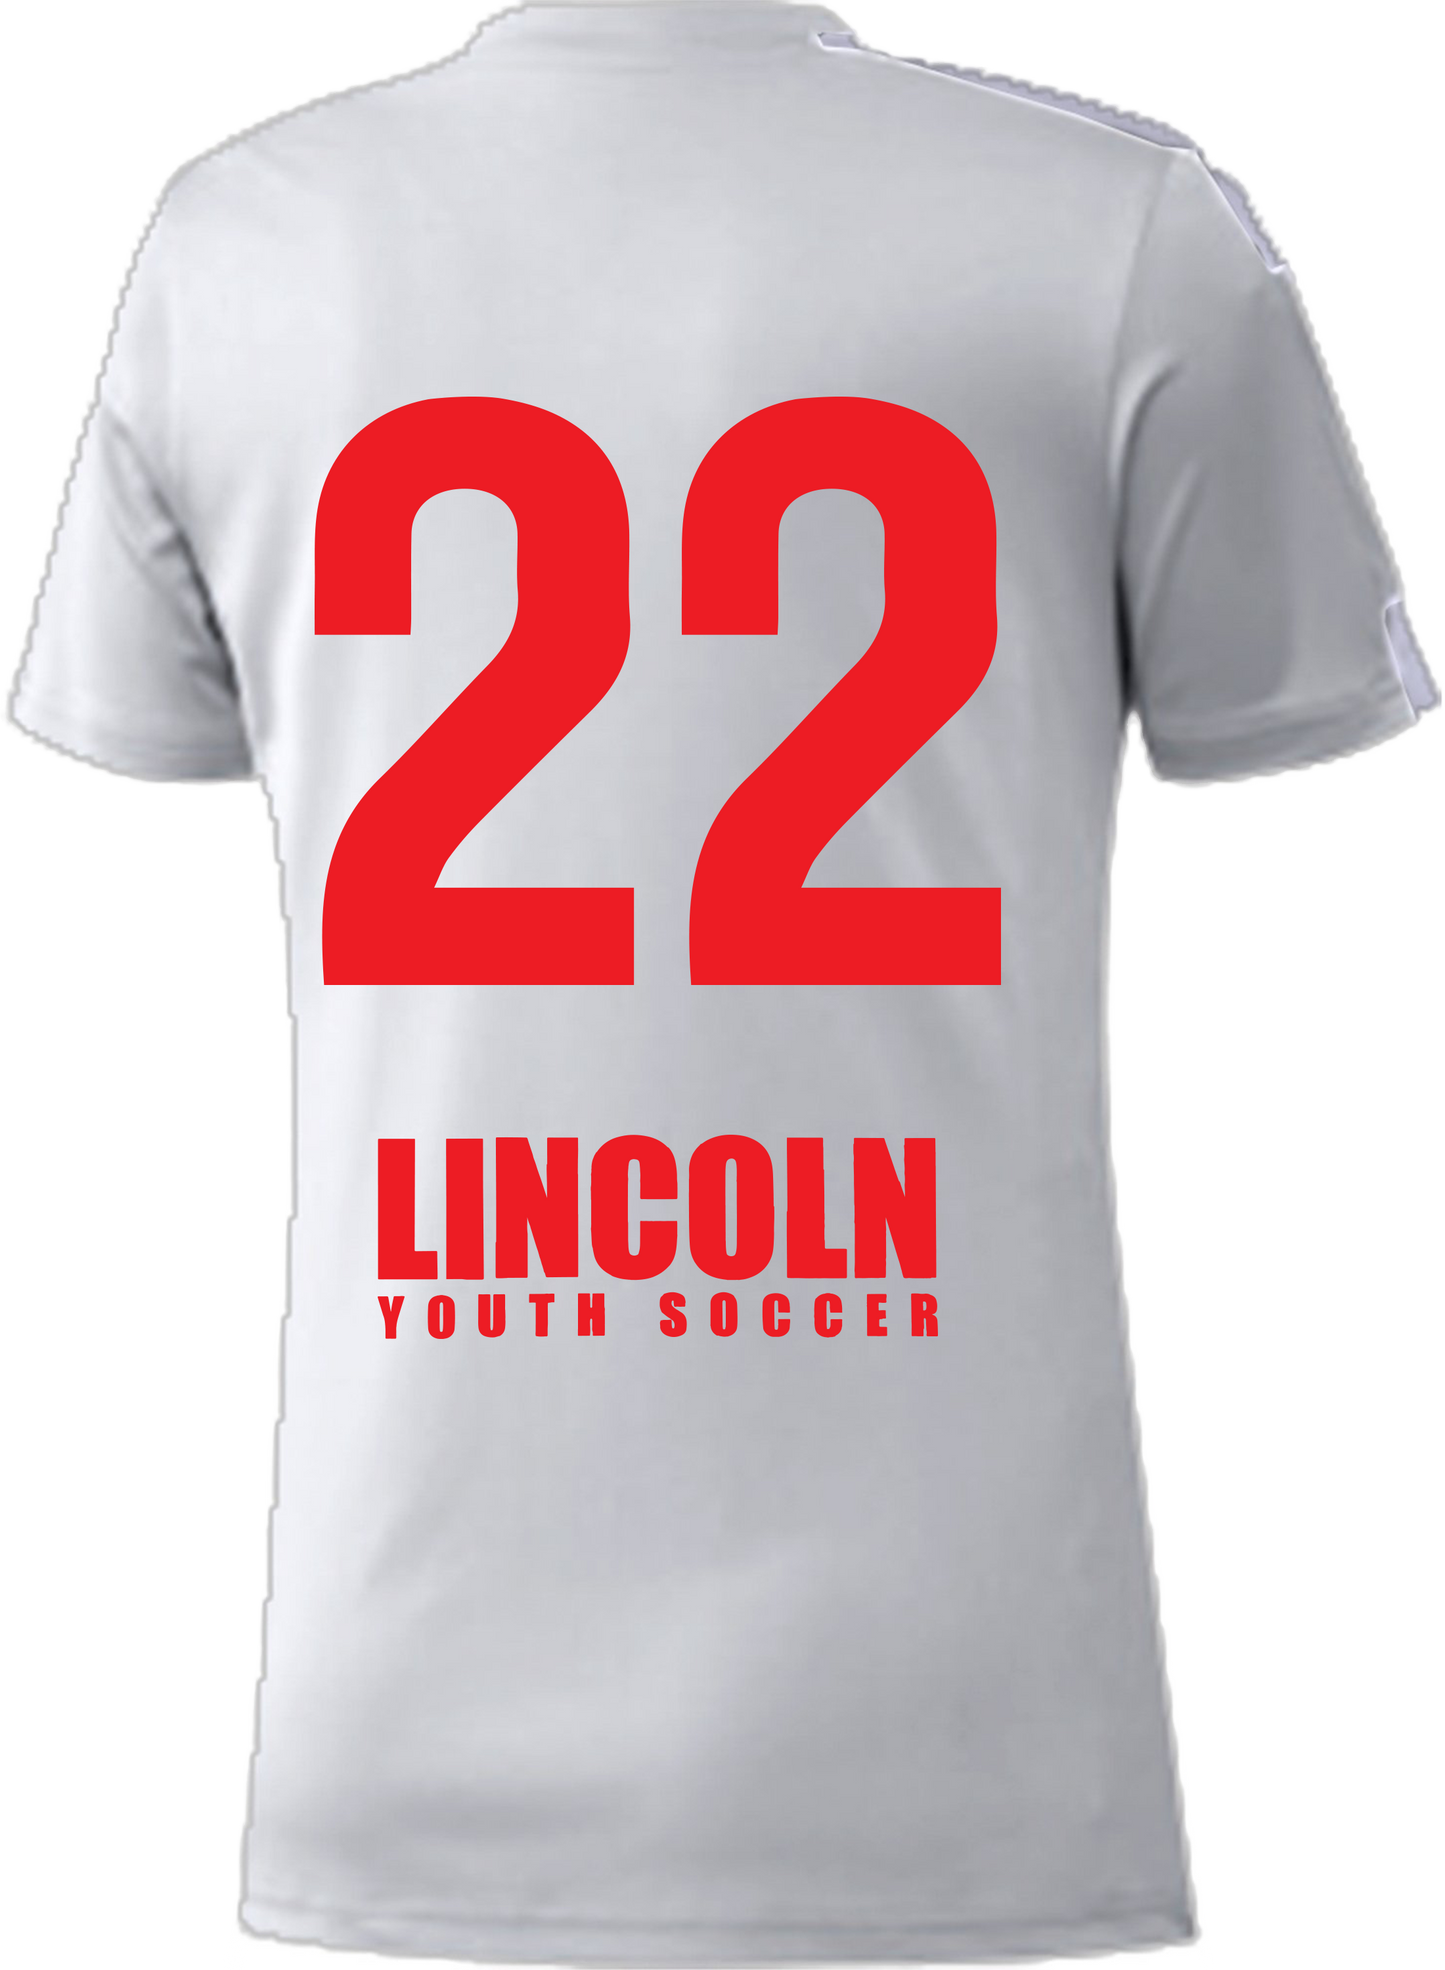 Lincoln Youth Soccer Game Jersey [Women's]